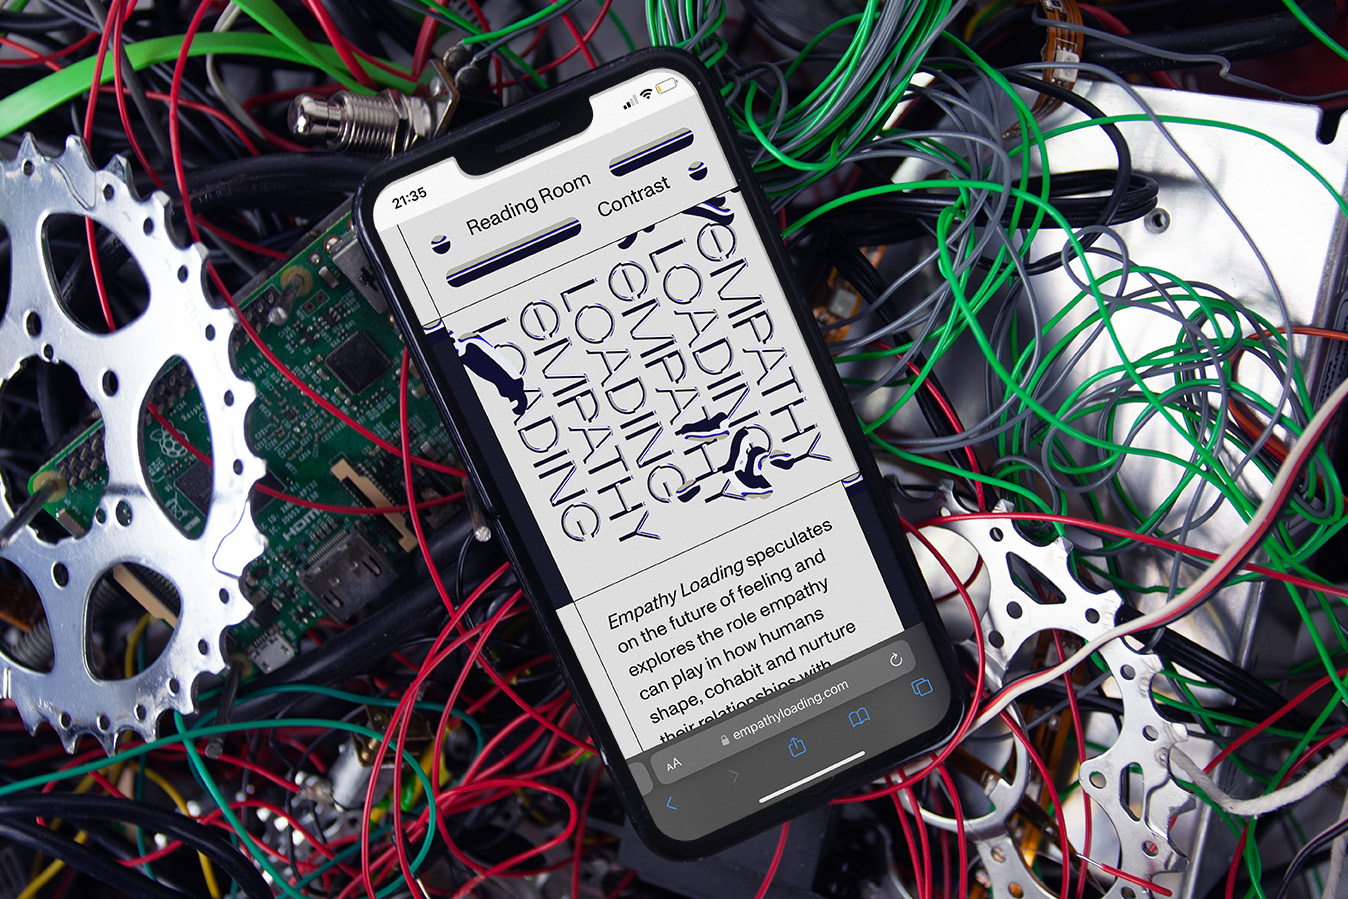 alt: A mobile phone sitting on top of a pile of electroics and wires, displayed on the phone is the Empathy Loading moblie site home page.